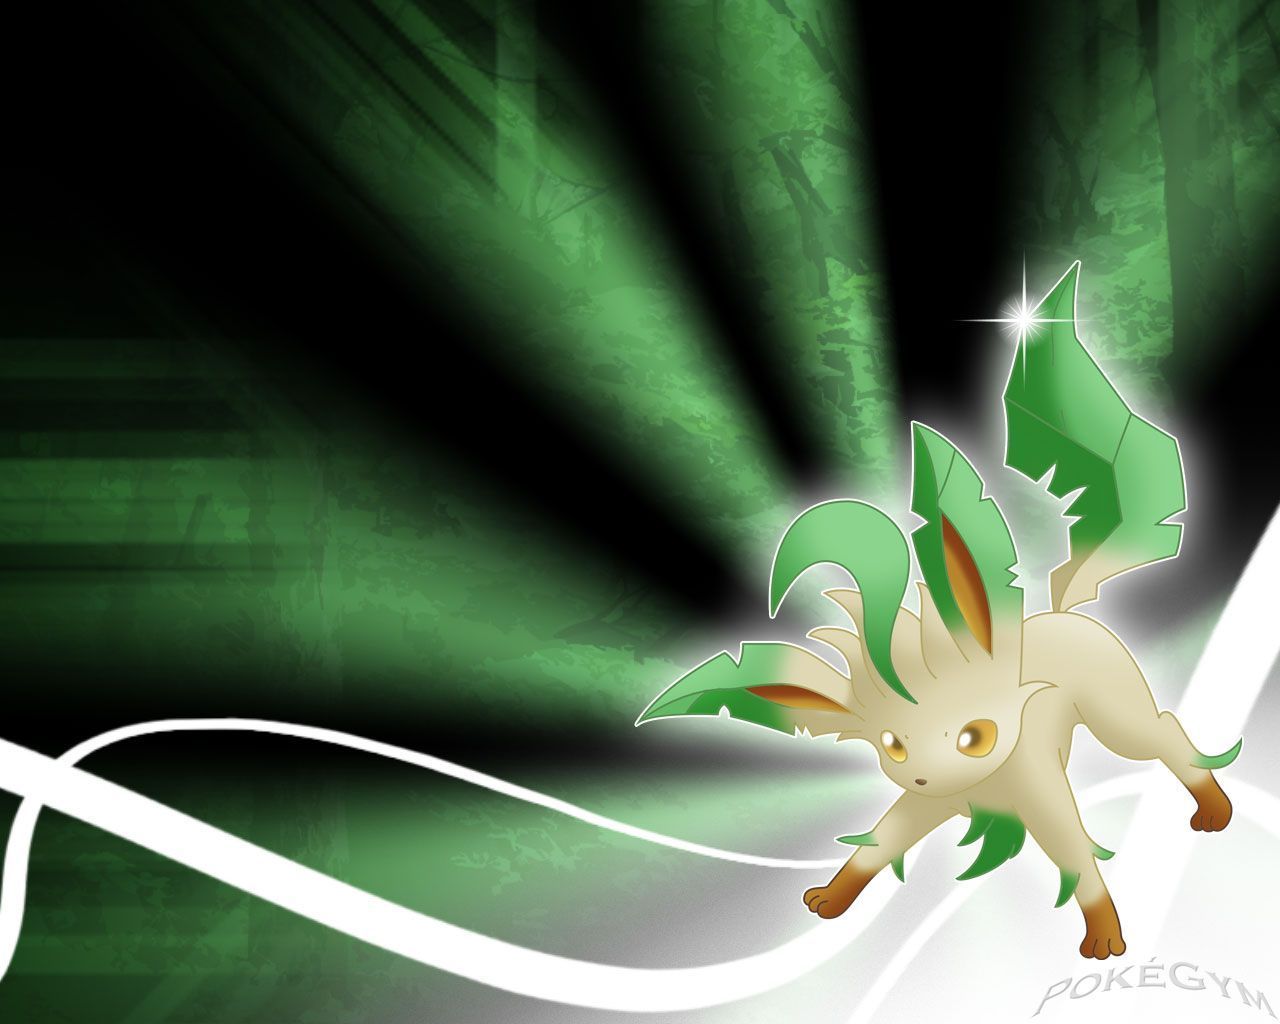 Leafeon Image HD Wallpaper And Background Photos